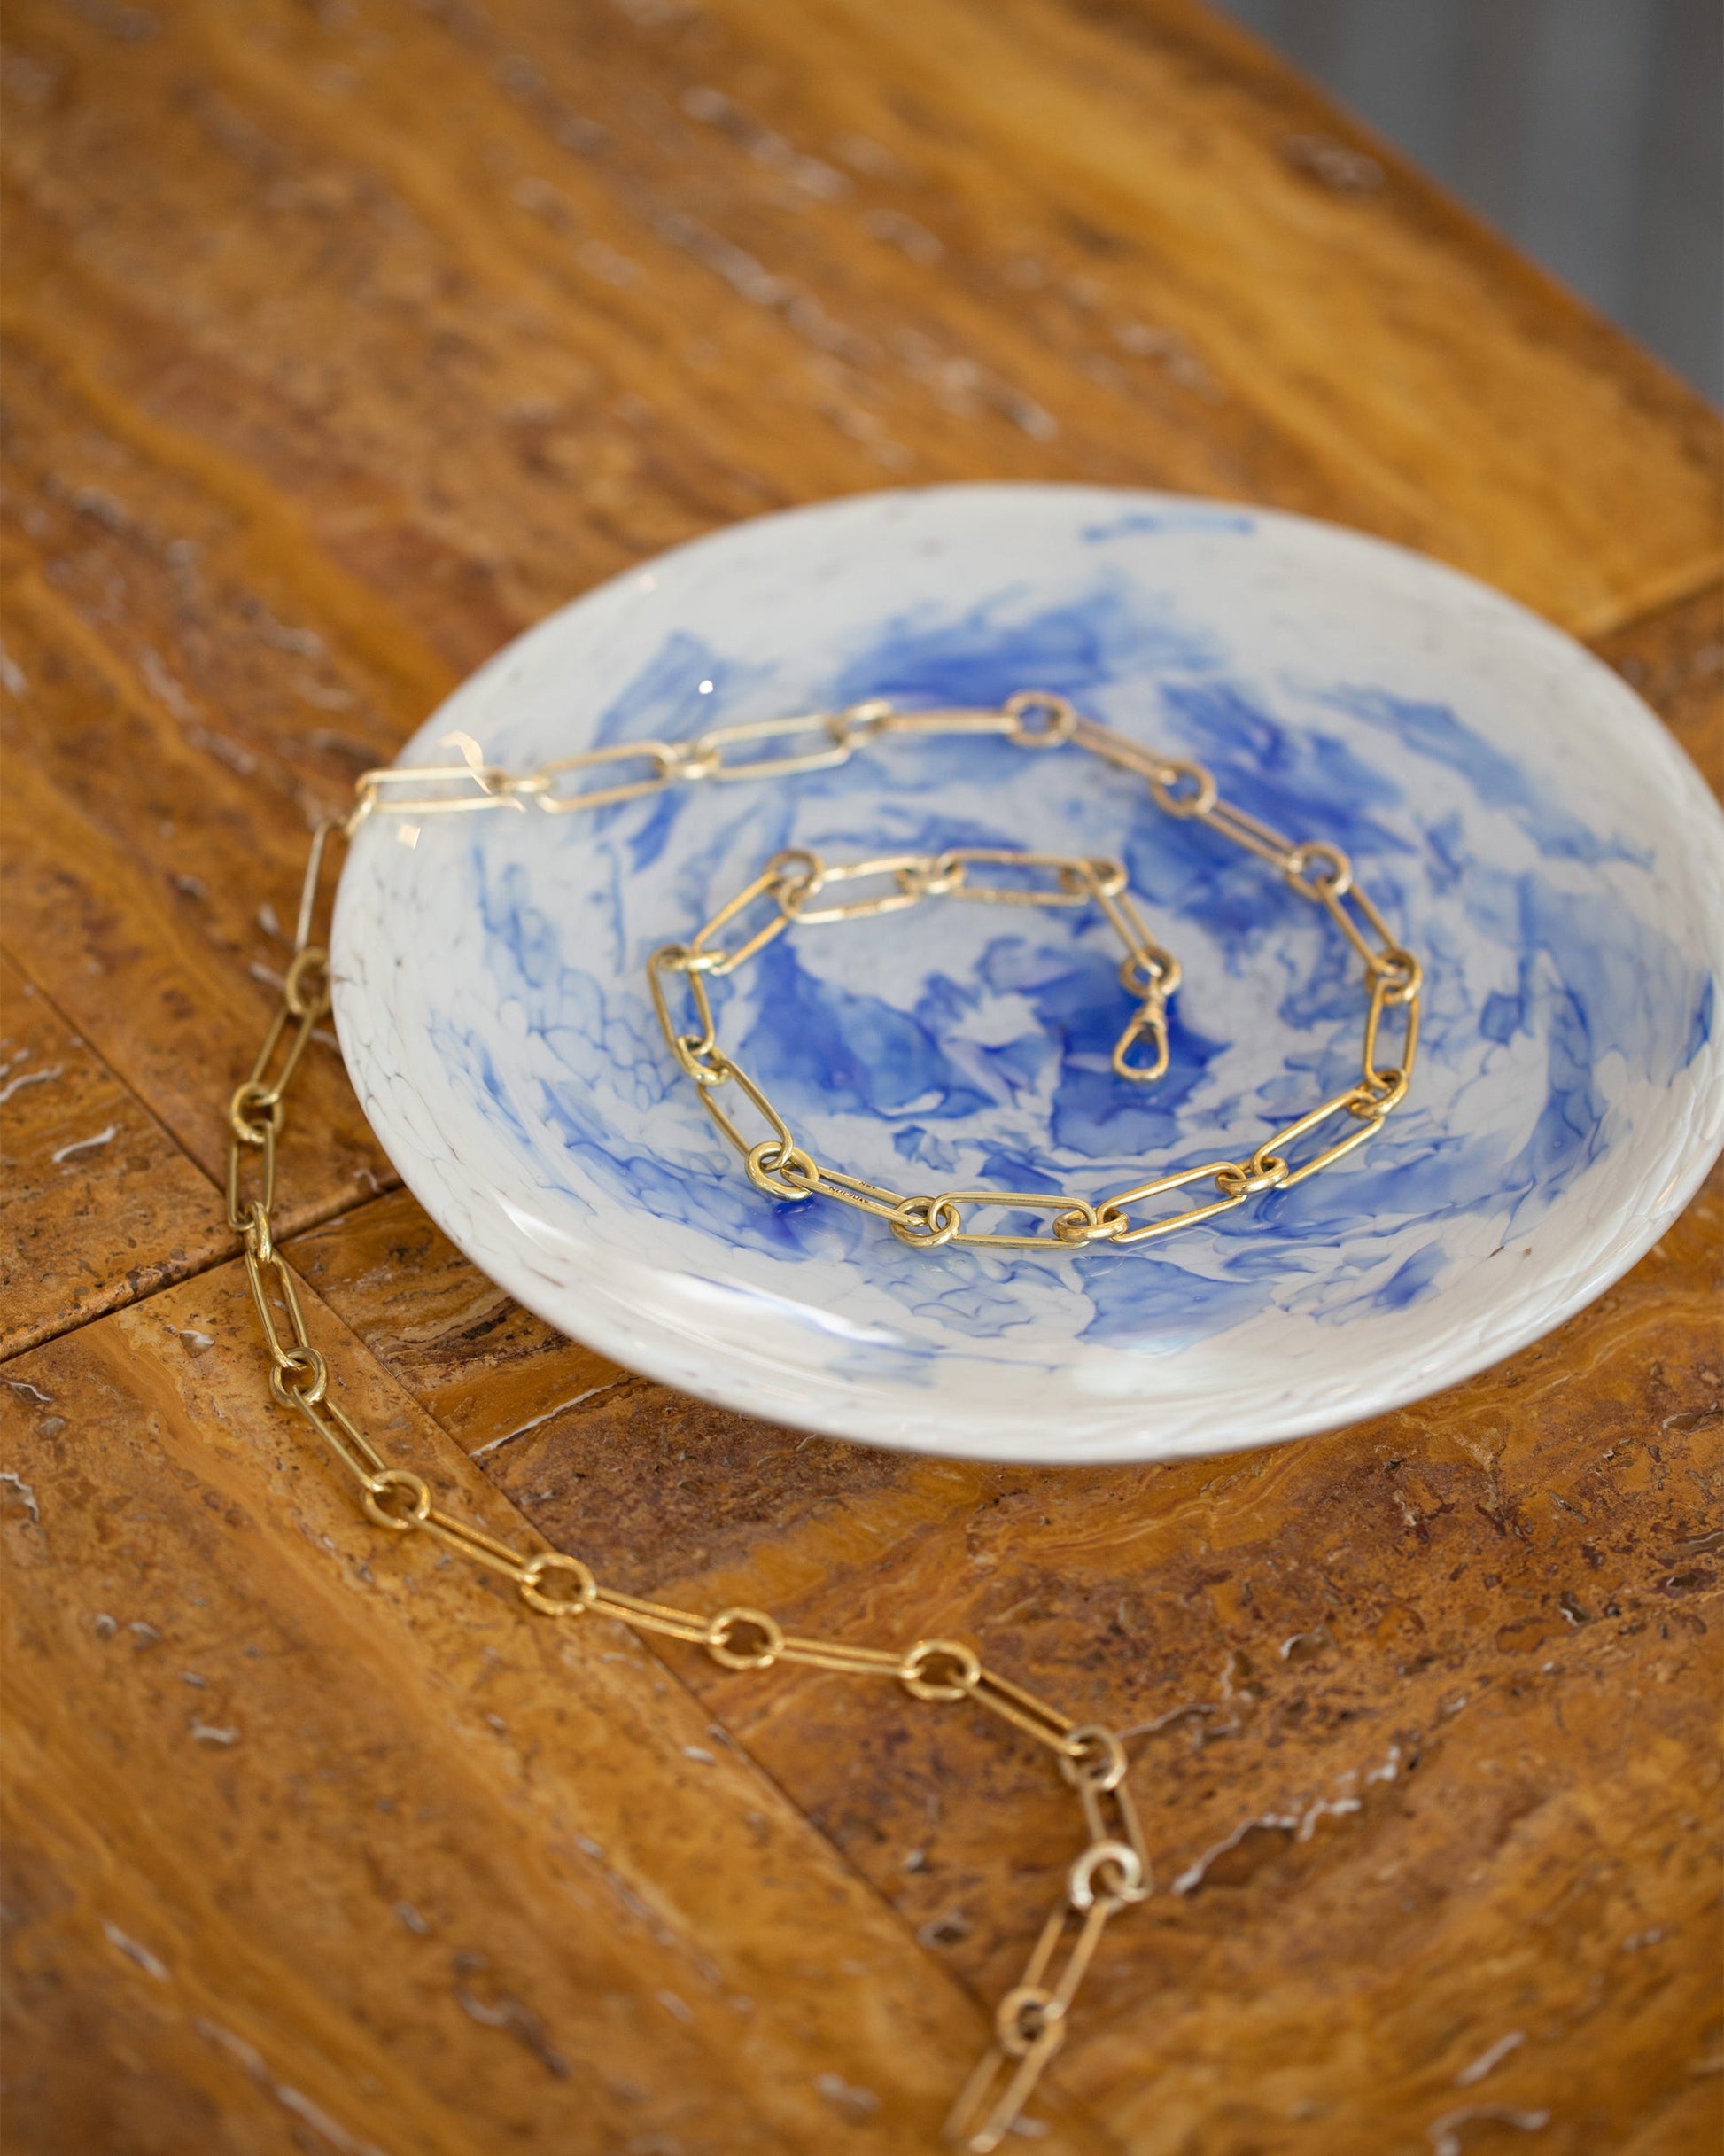 Styled image featuring Stories of Italy Blue and Endless 34" Link Necklace and Nougat Dessert Plates.